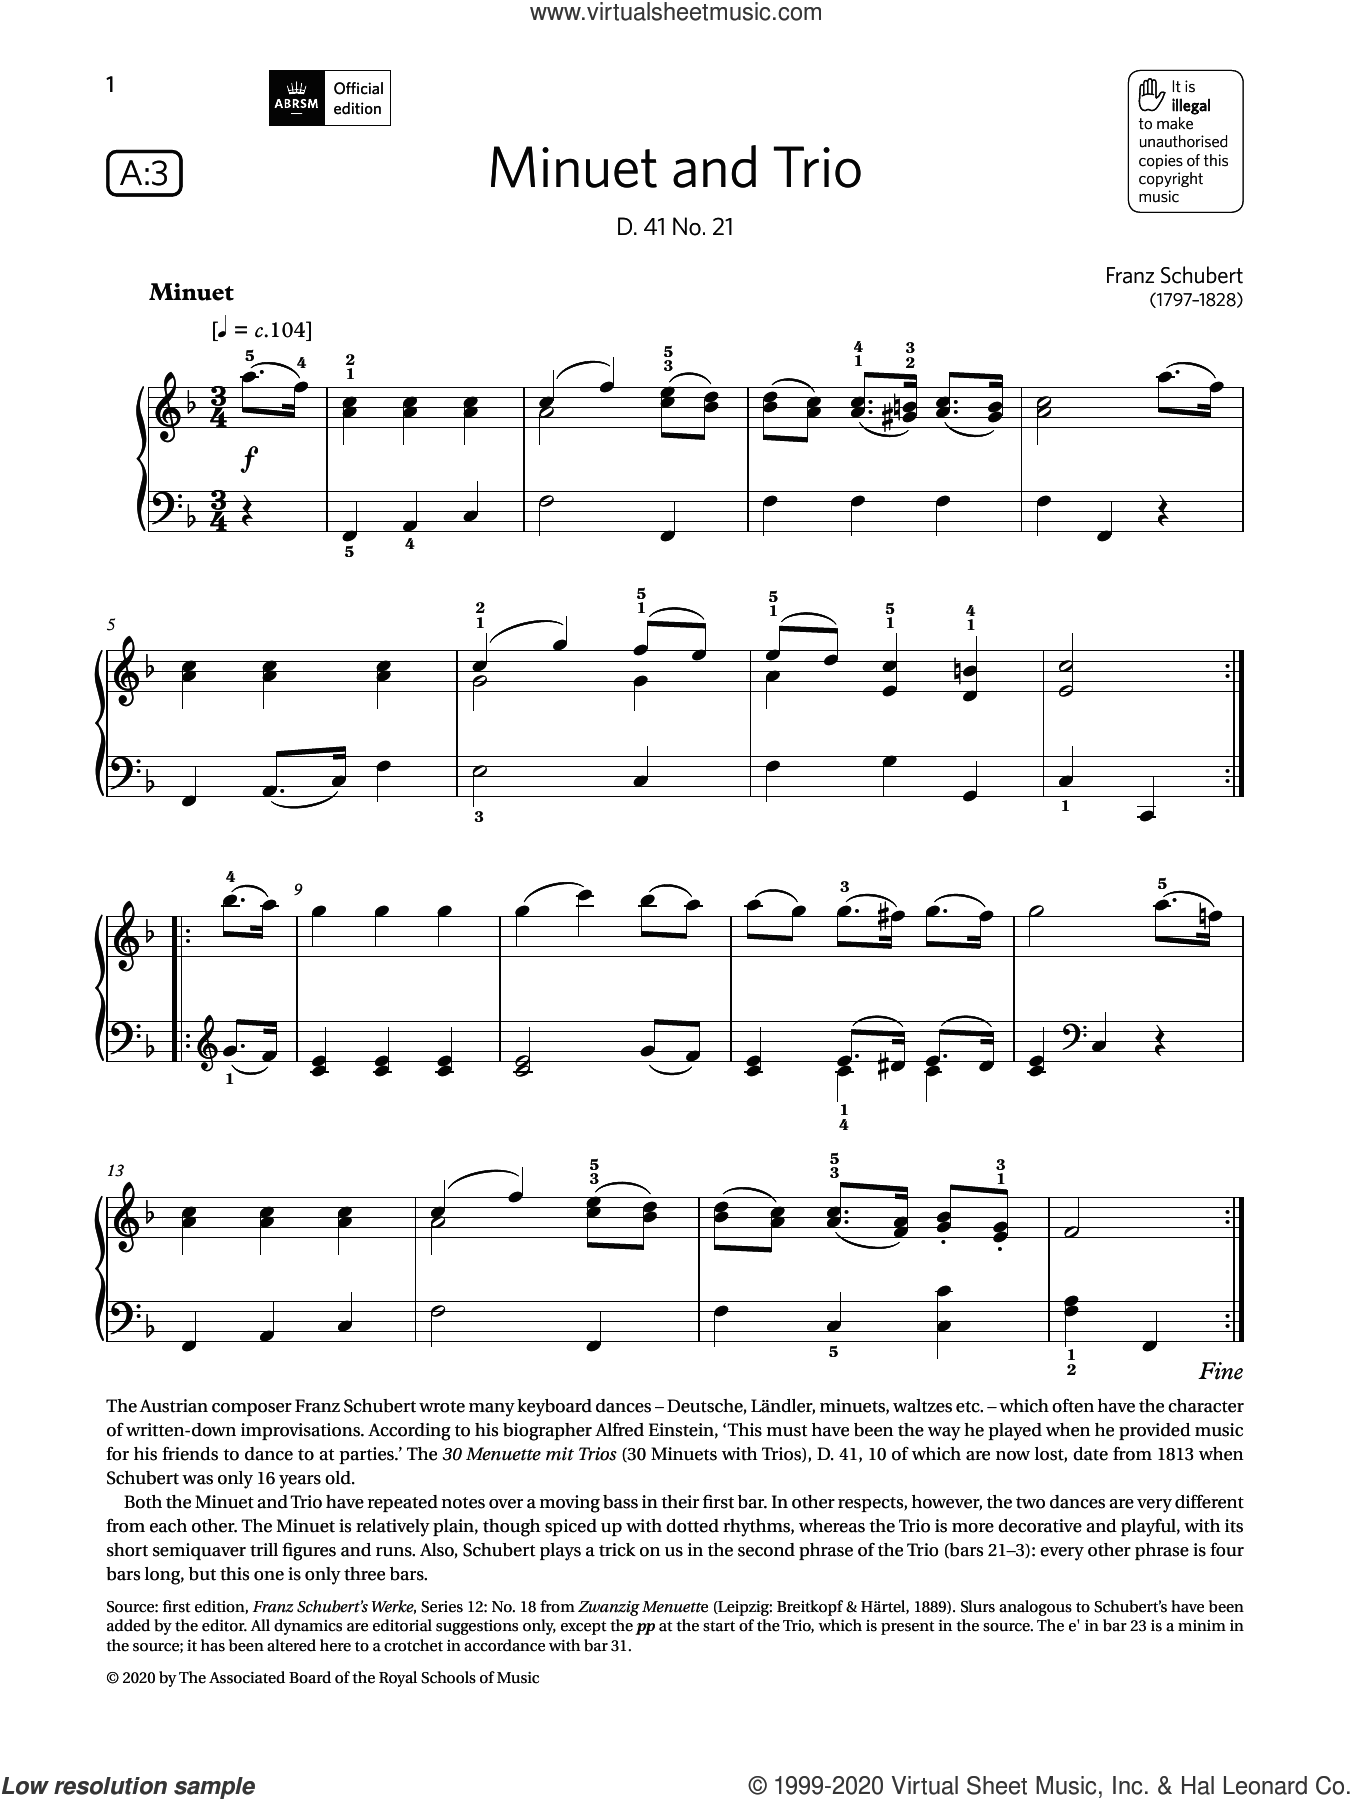 komedie G Misschien Schubert - Minuet and Trio (Grade 4, list A3, from the ABRSM Piano Syllabus  2021 and 2022) sheet music for piano solo